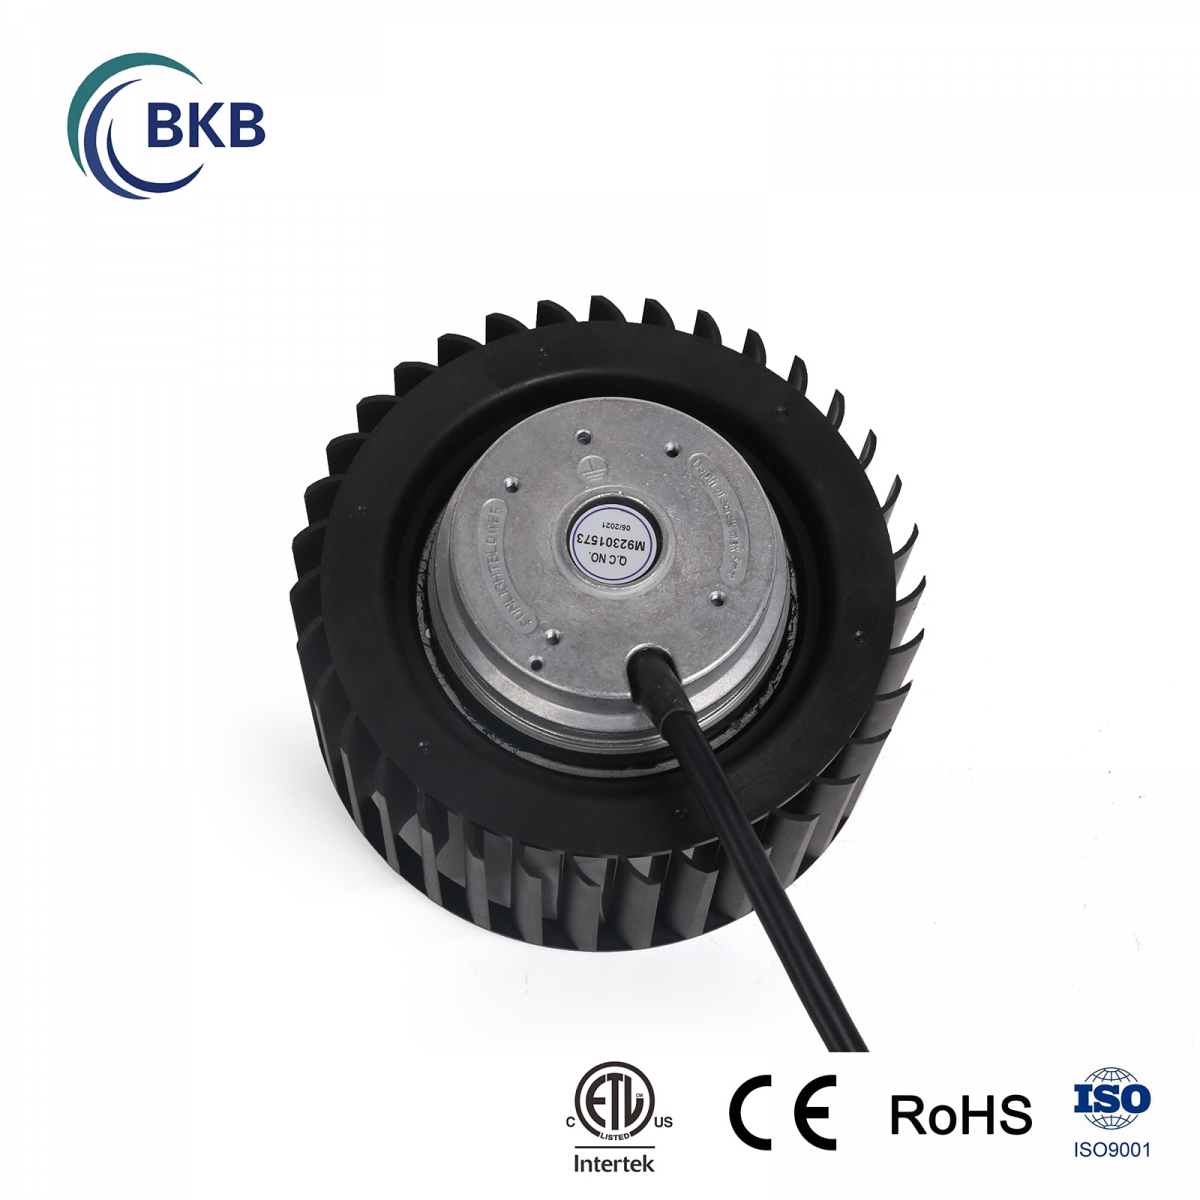 Plastic forward curved centrifugal fans Φ140-SUNLIGHT BLOWER,Centrifugal Fans, Inline Fans,Motors,Backward curved centrifugal fans ,Forward curved centrifugal fans ,inlet fans, EC fans